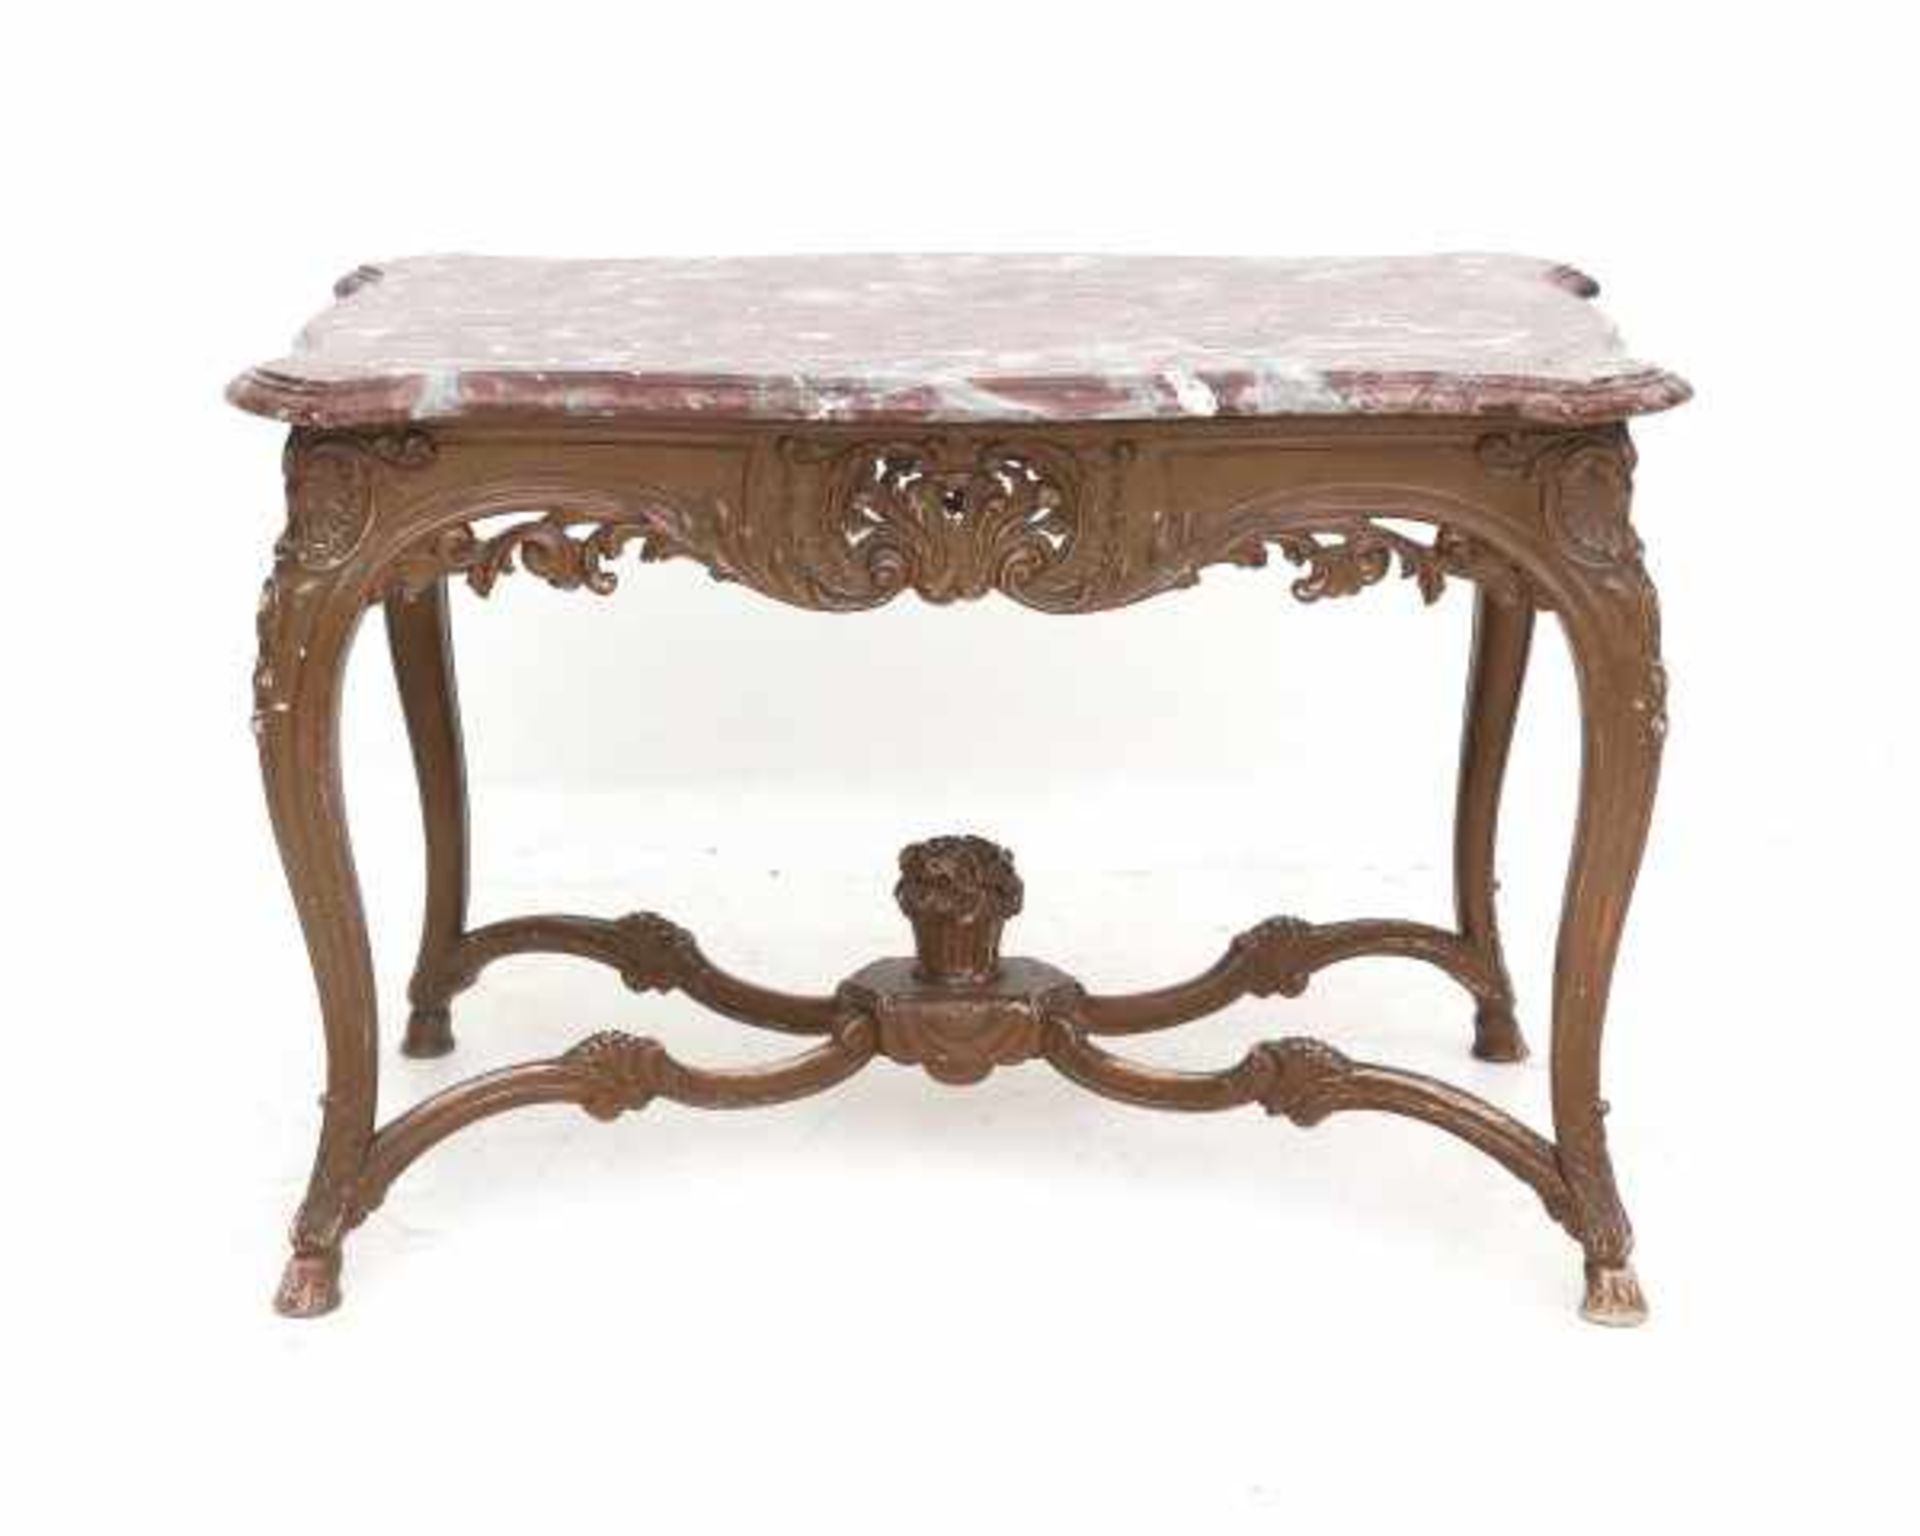 A Baroque style table with red marble top. 19th century.Top 112 x 73 cm.- - -29.00 % buyer's premium